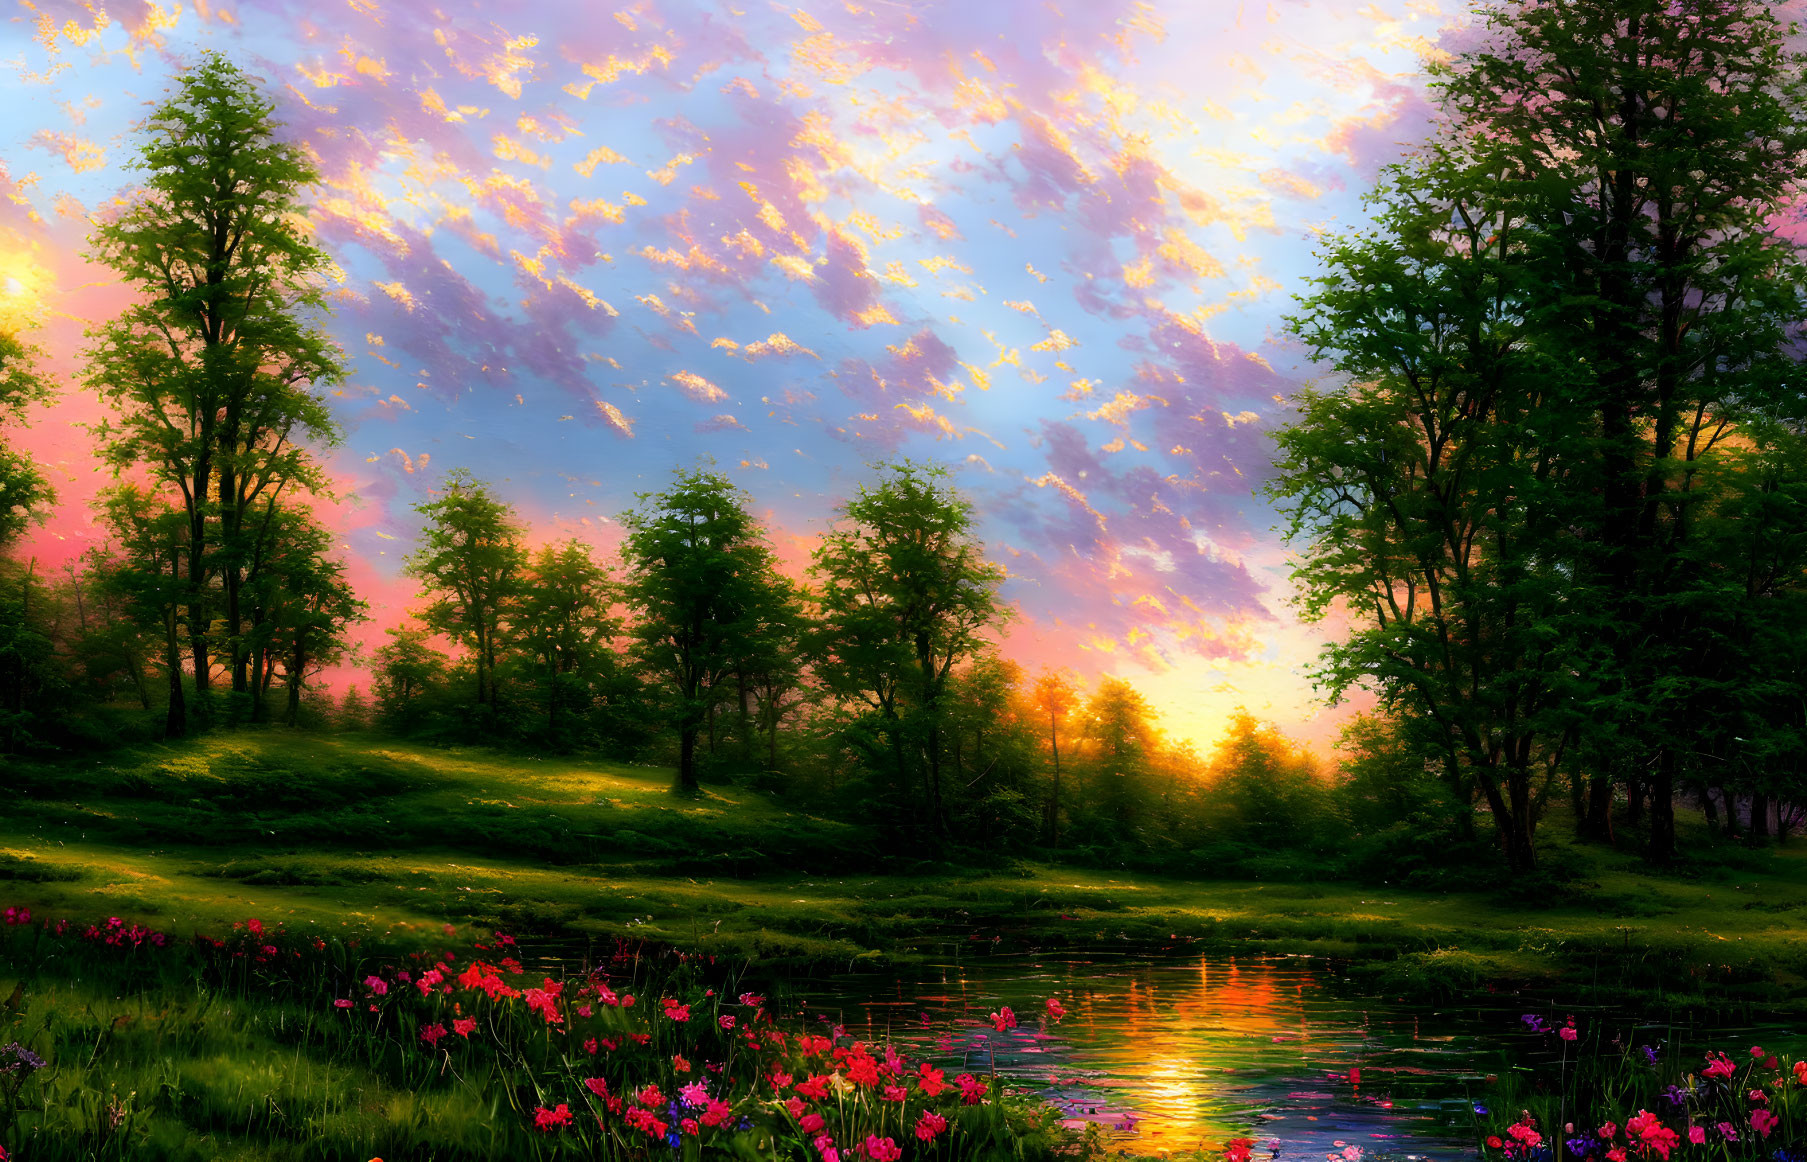 Colorful landscape with trees, pond, sunset reflection, pink clouds, and flowers